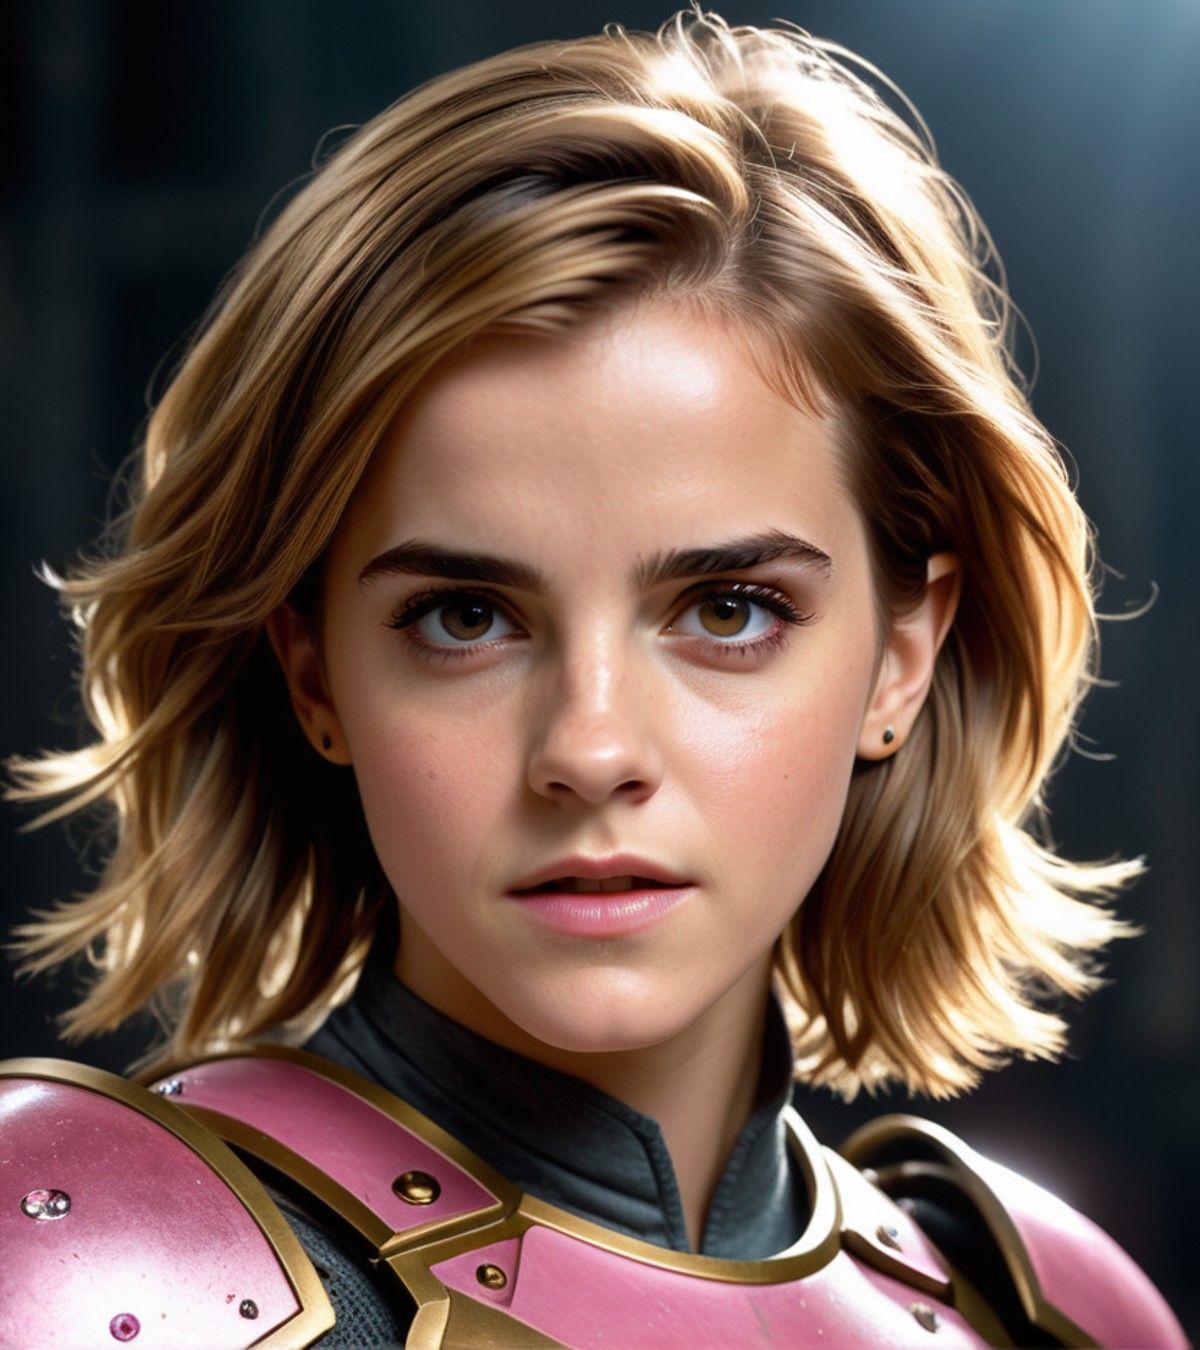 photo of emma watson, 1980s, beauty face, armor gold, hair pink, ((realism)), extremely high quality RAW photograph, ultra...